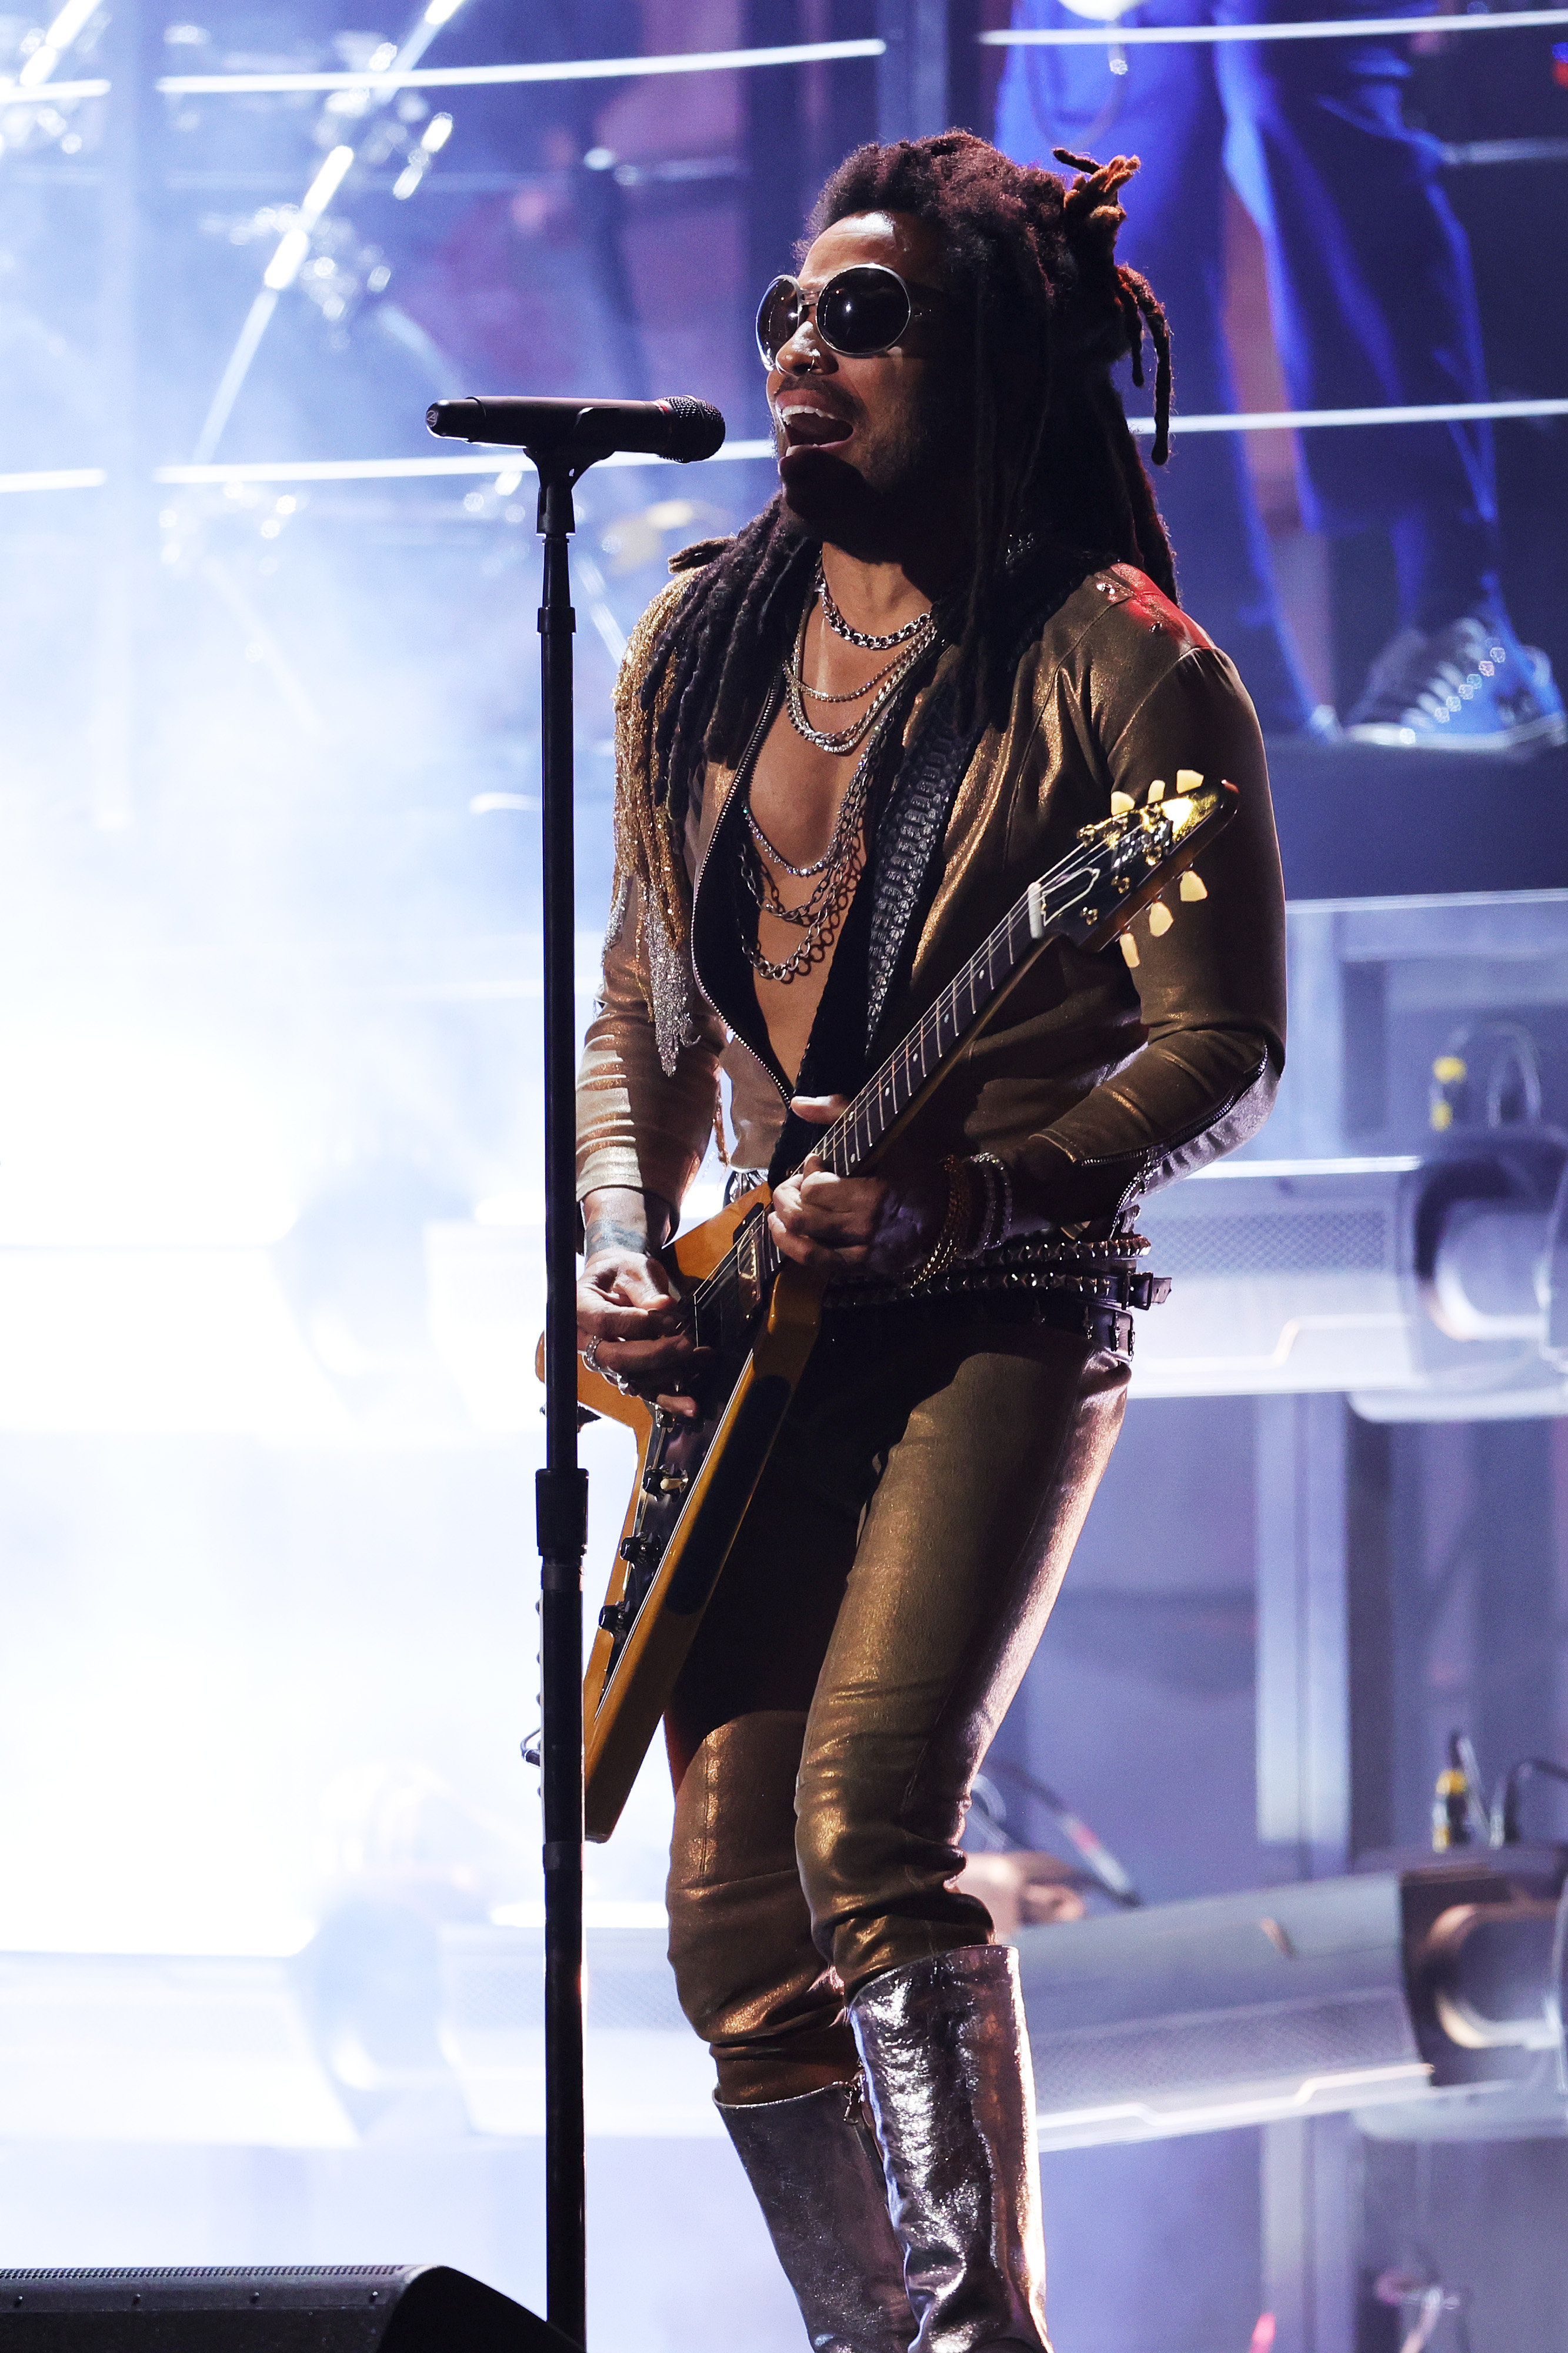 Lenny Kravitz Had the Best Outfits Changes at the 2022 Grammys